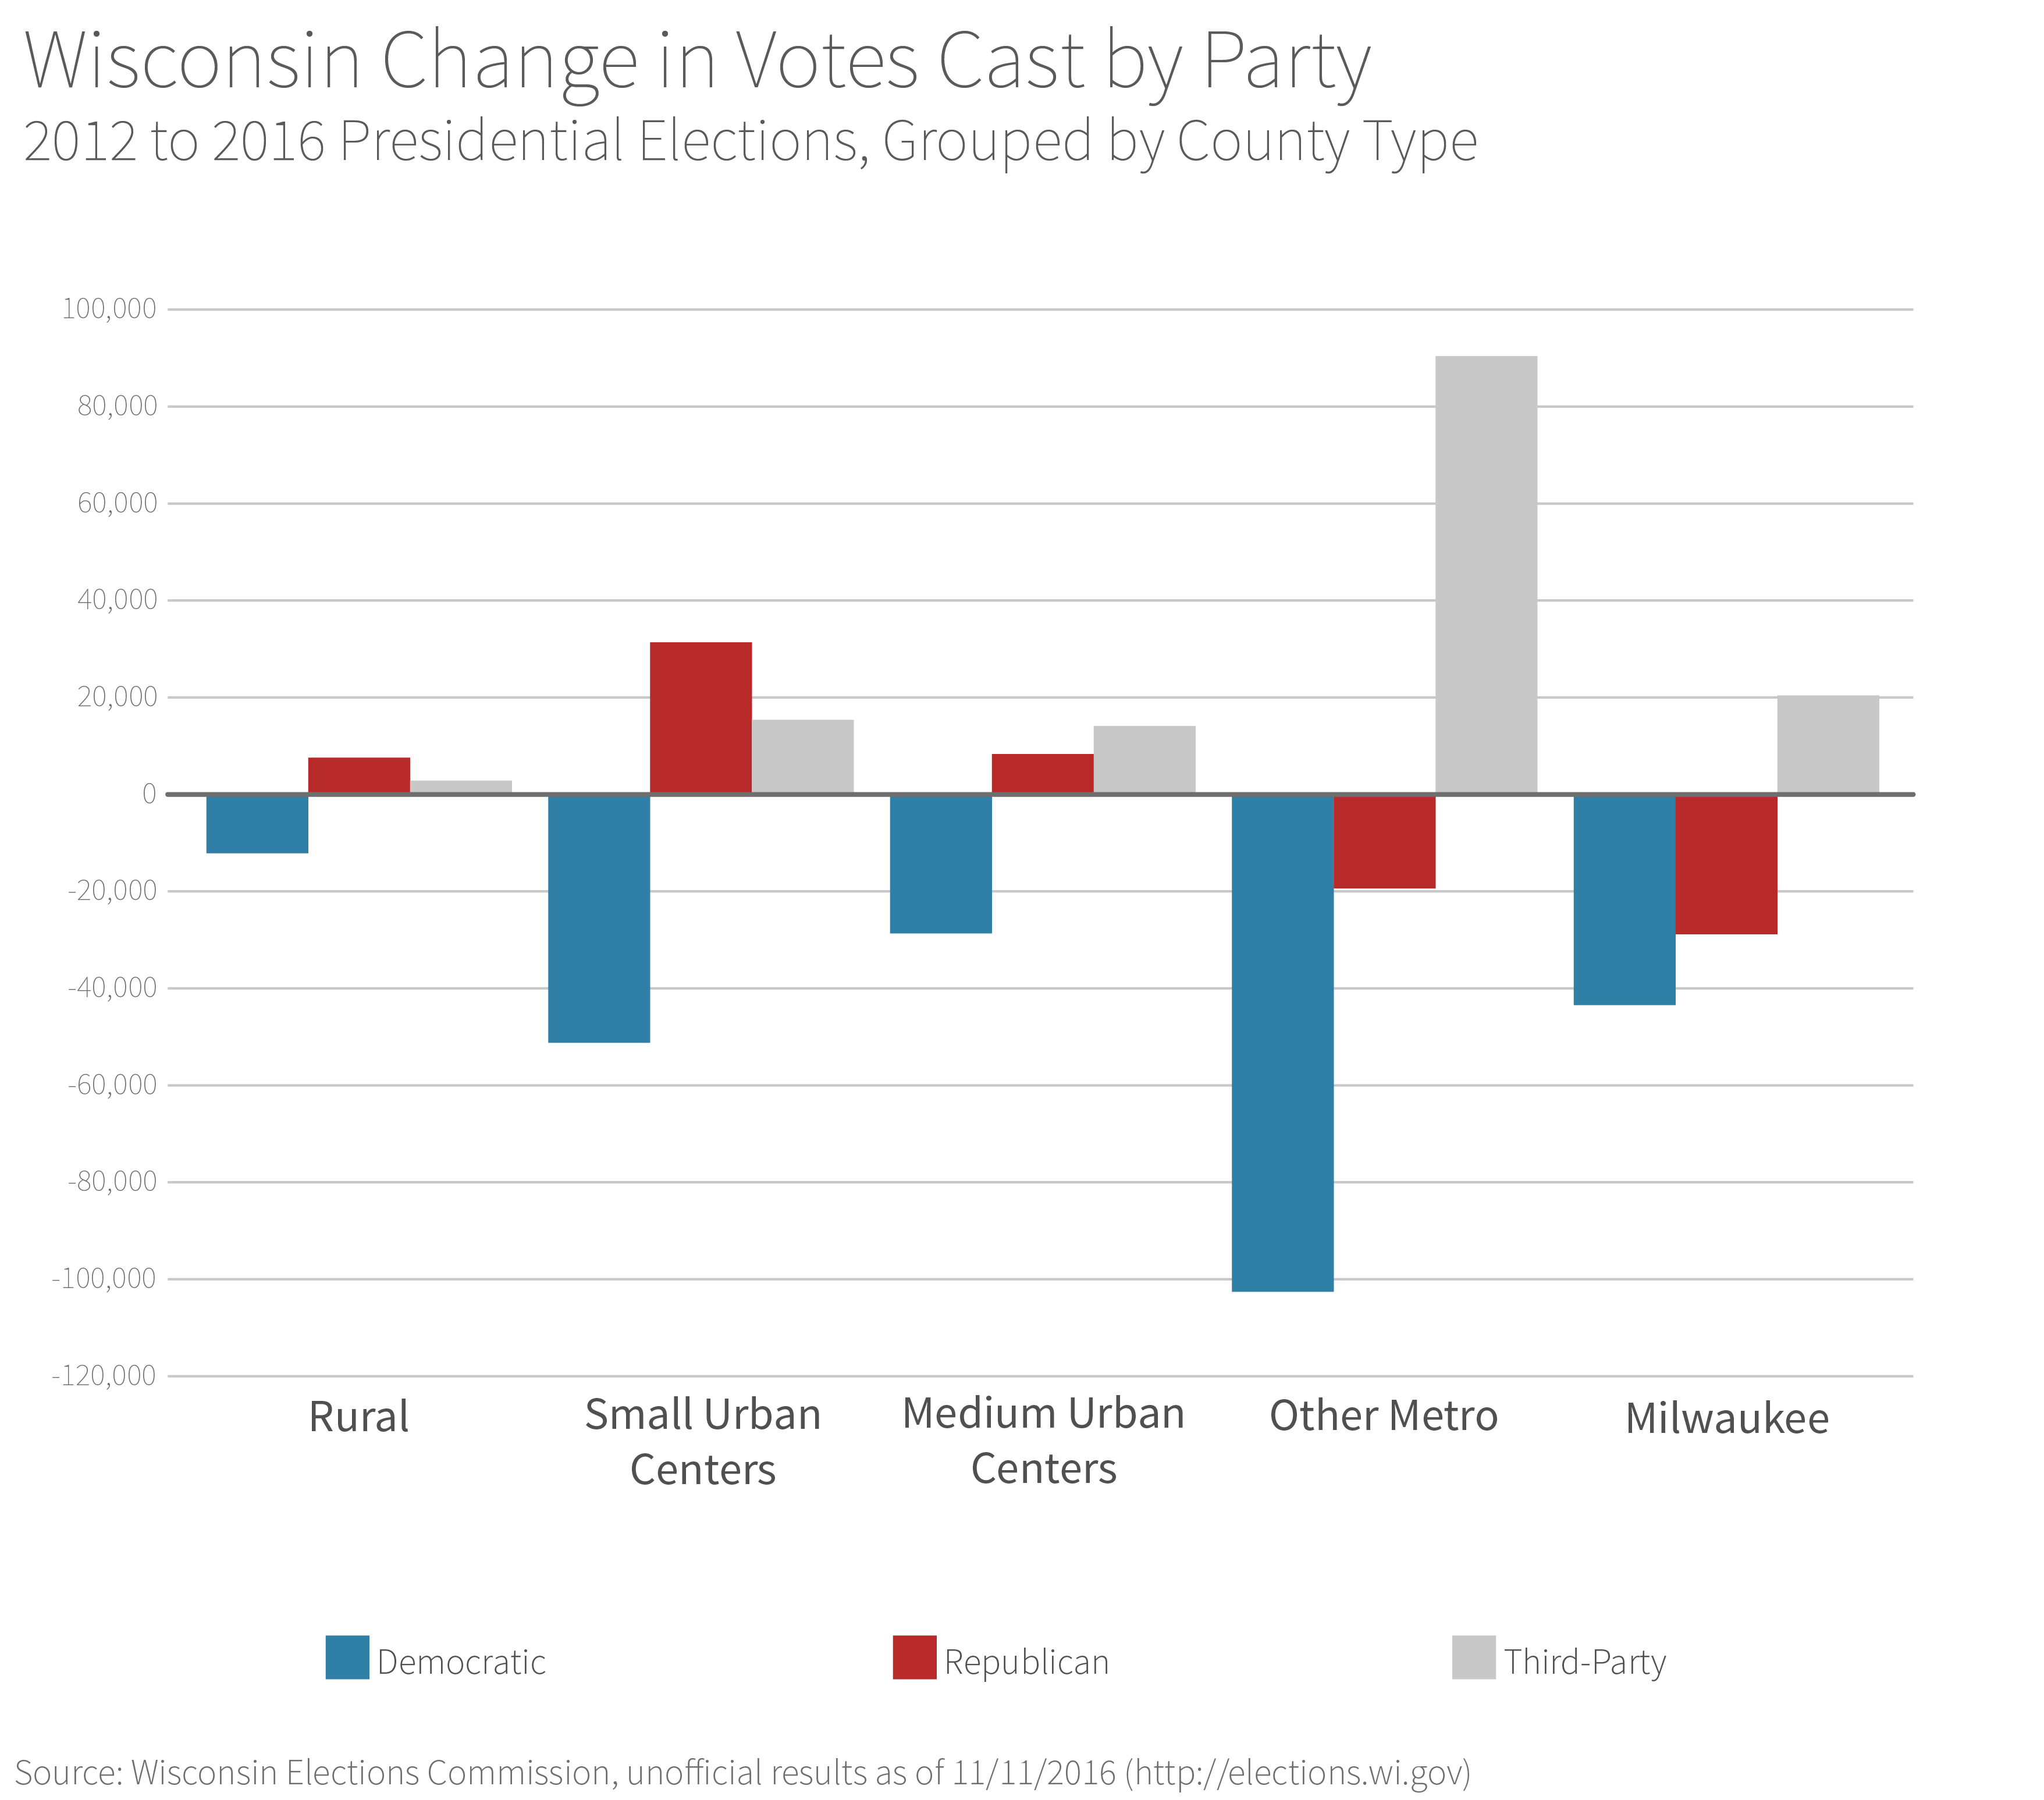 chart showing change in votes cast by party, grouped by Wisconsin county rurality, 2012 to 2016 presidential elections